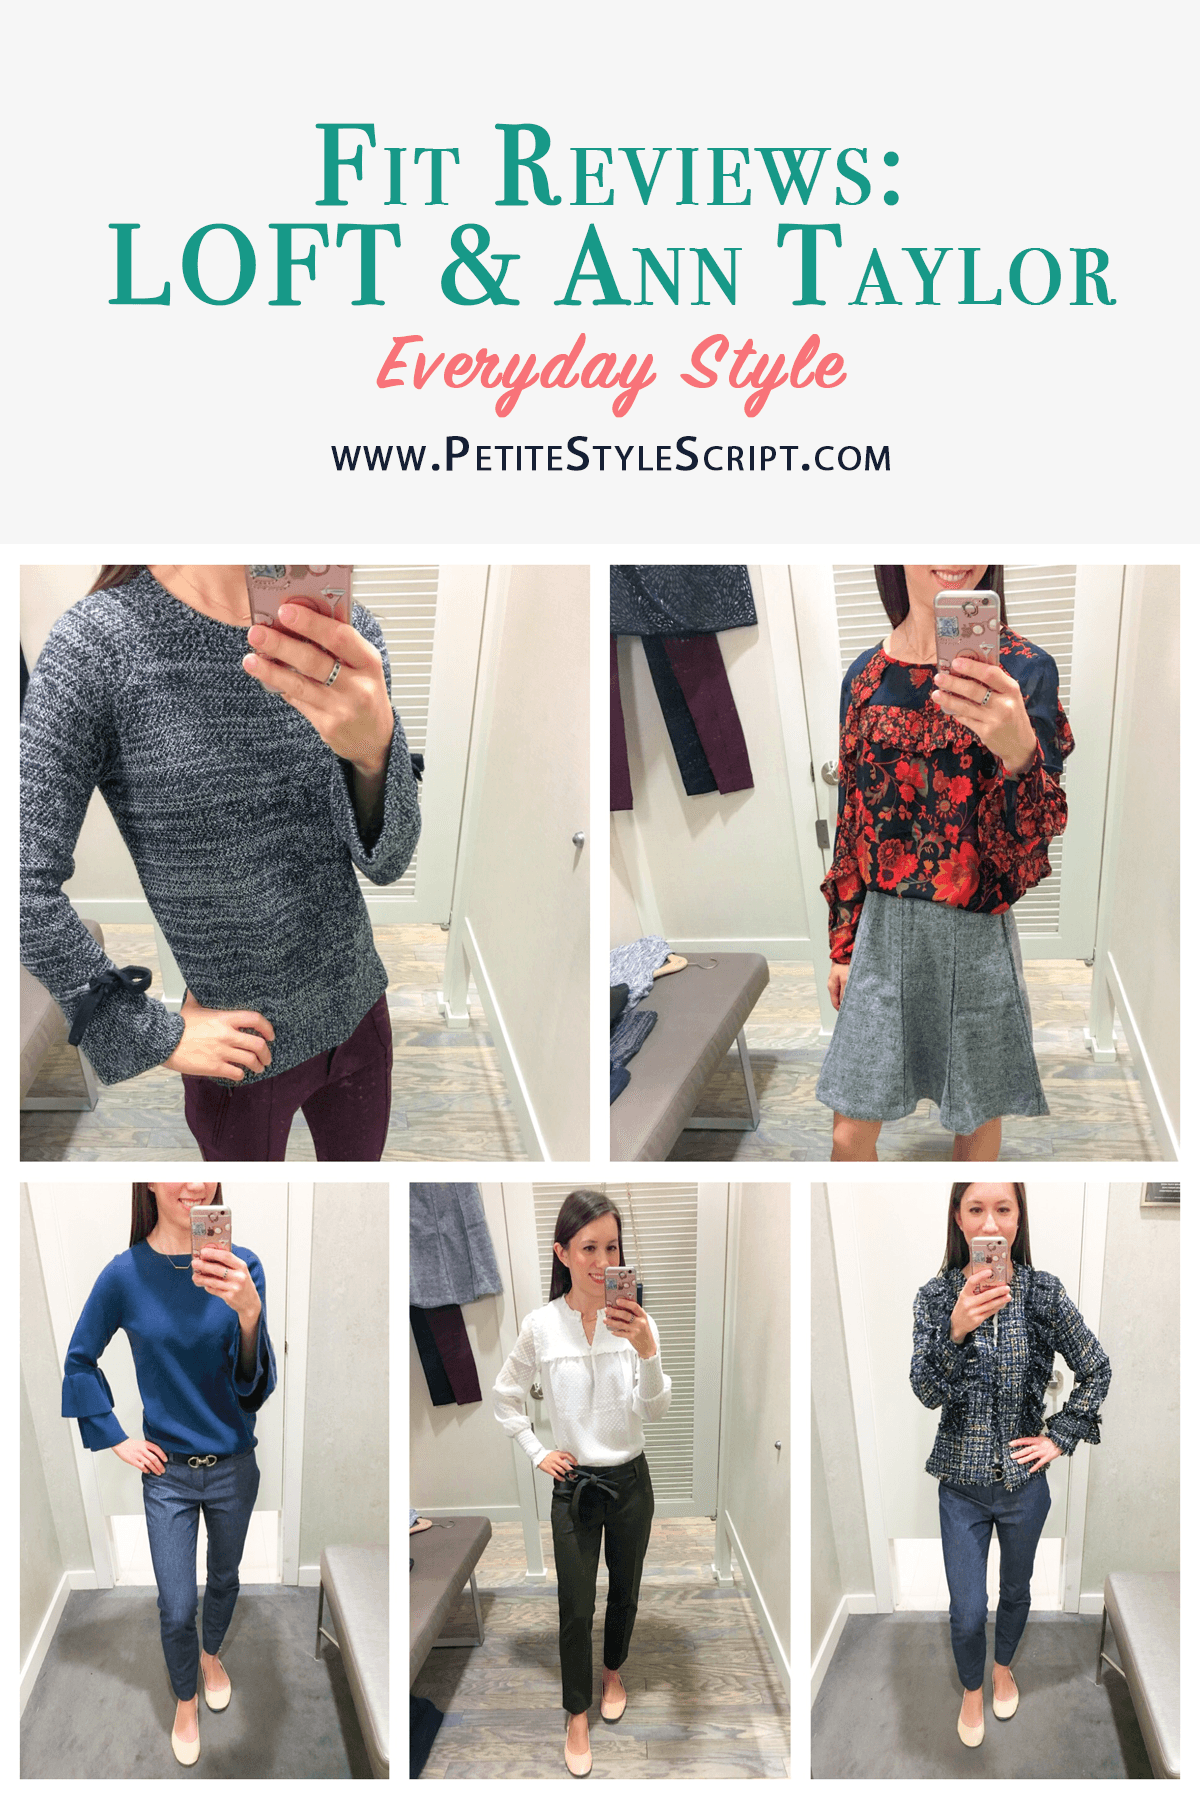 Ann Taylor LOFT Fit Reviews | New Arrivals review | Flounce sleeve sweater teal green review | Scuba leggings | Bow tie sweater | Flare Sweater Skirt | Sheath dress | Tweed jacket blazer | Work outfit inspiration | Casual fall outfits | Petite fashion and style blog